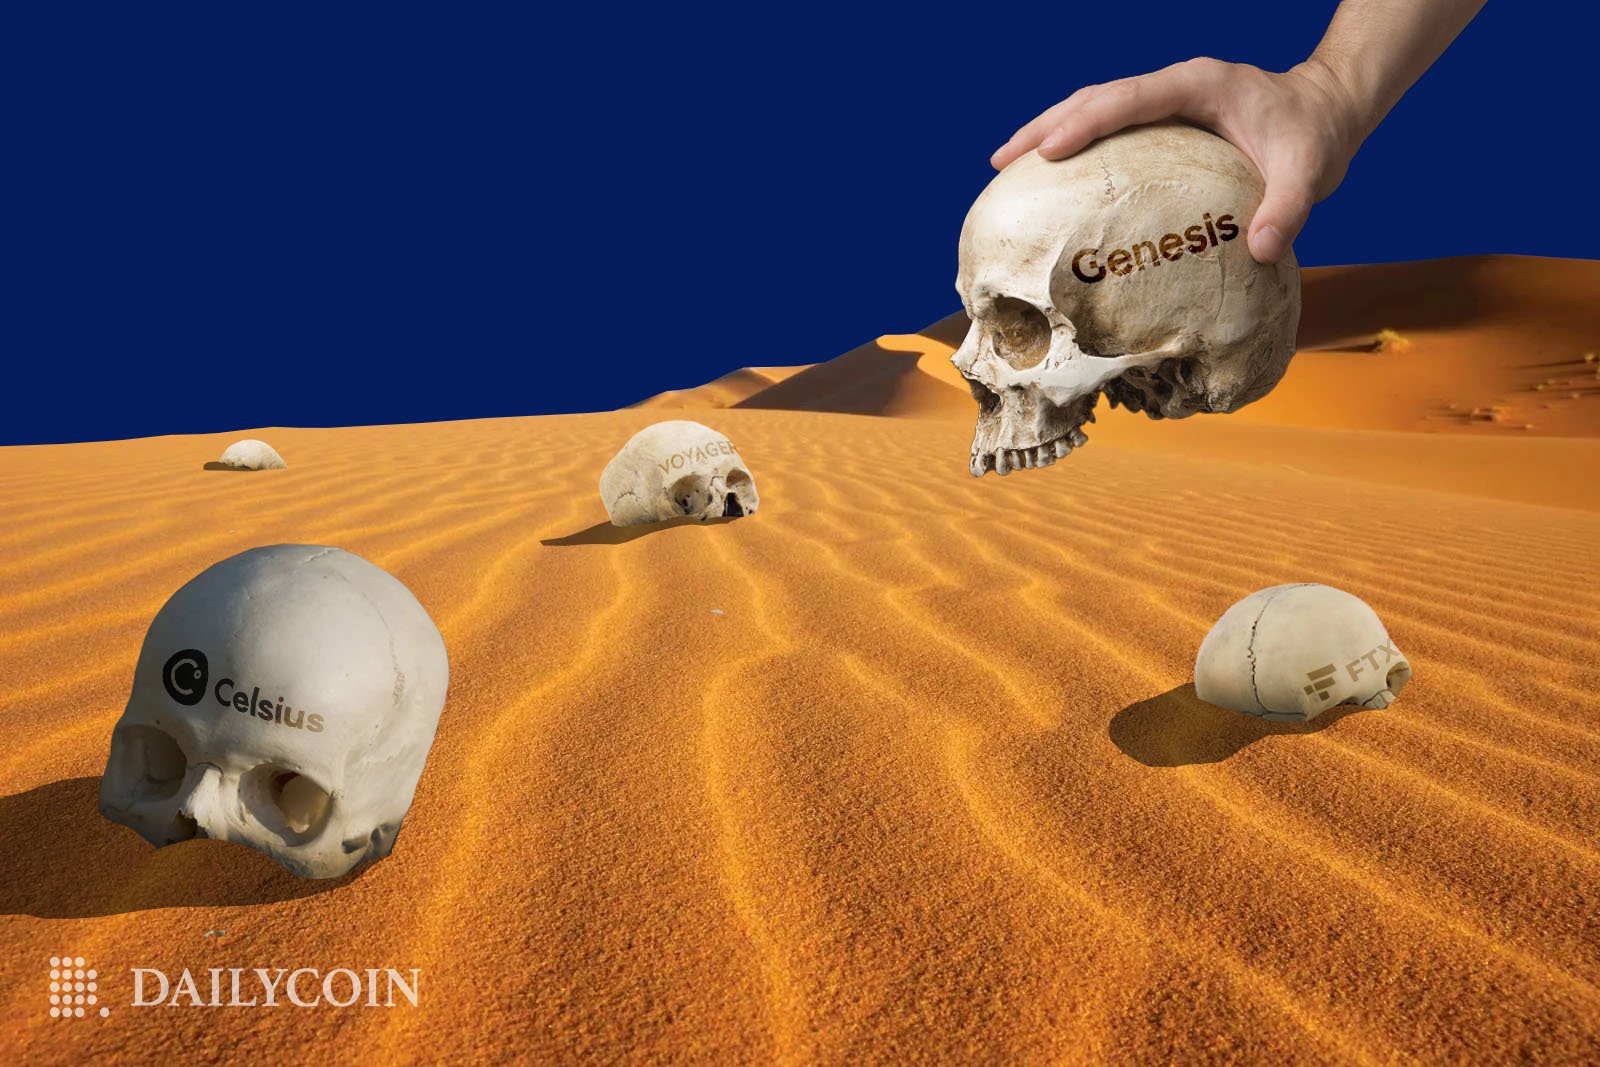 A human hand picking up human skull with Genesis written on it from the desert.